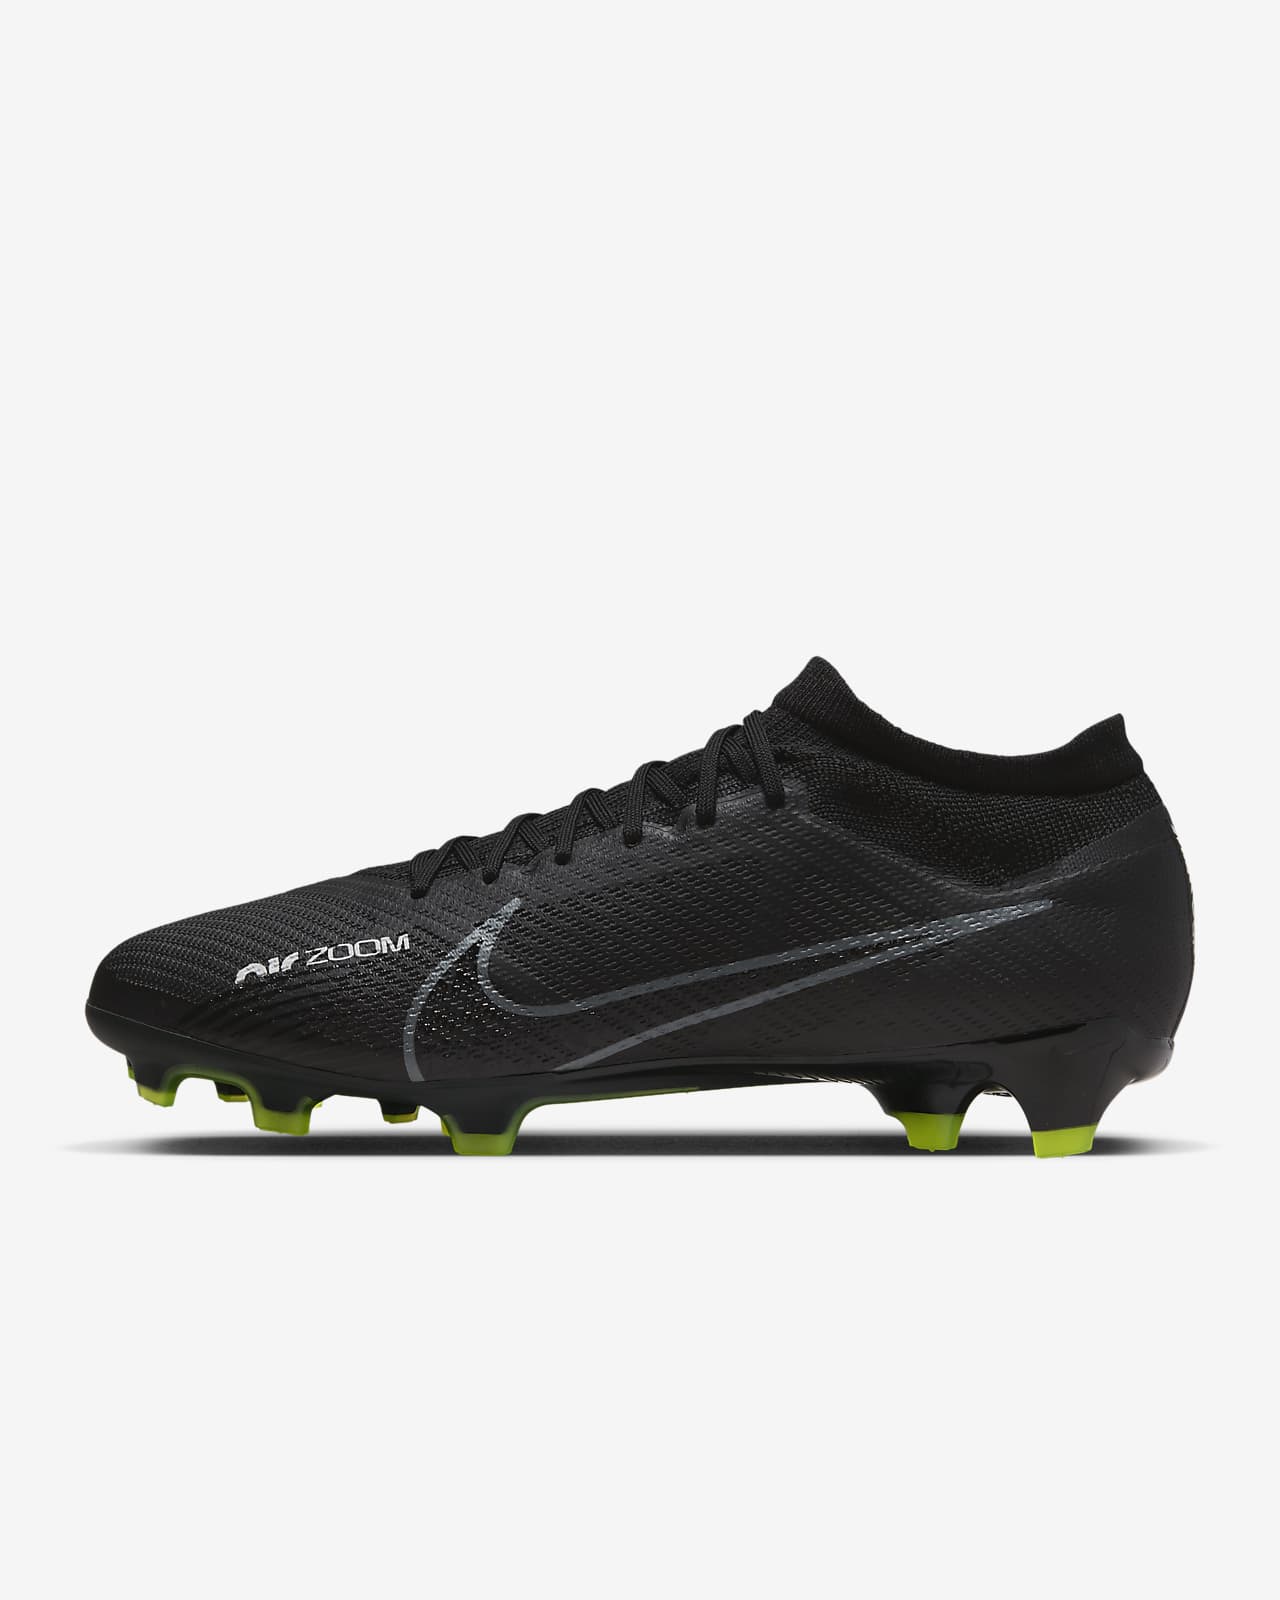 Nike Zoom Mercurial Vapor 15 Pro FG Firm-Ground Soccer Cleats